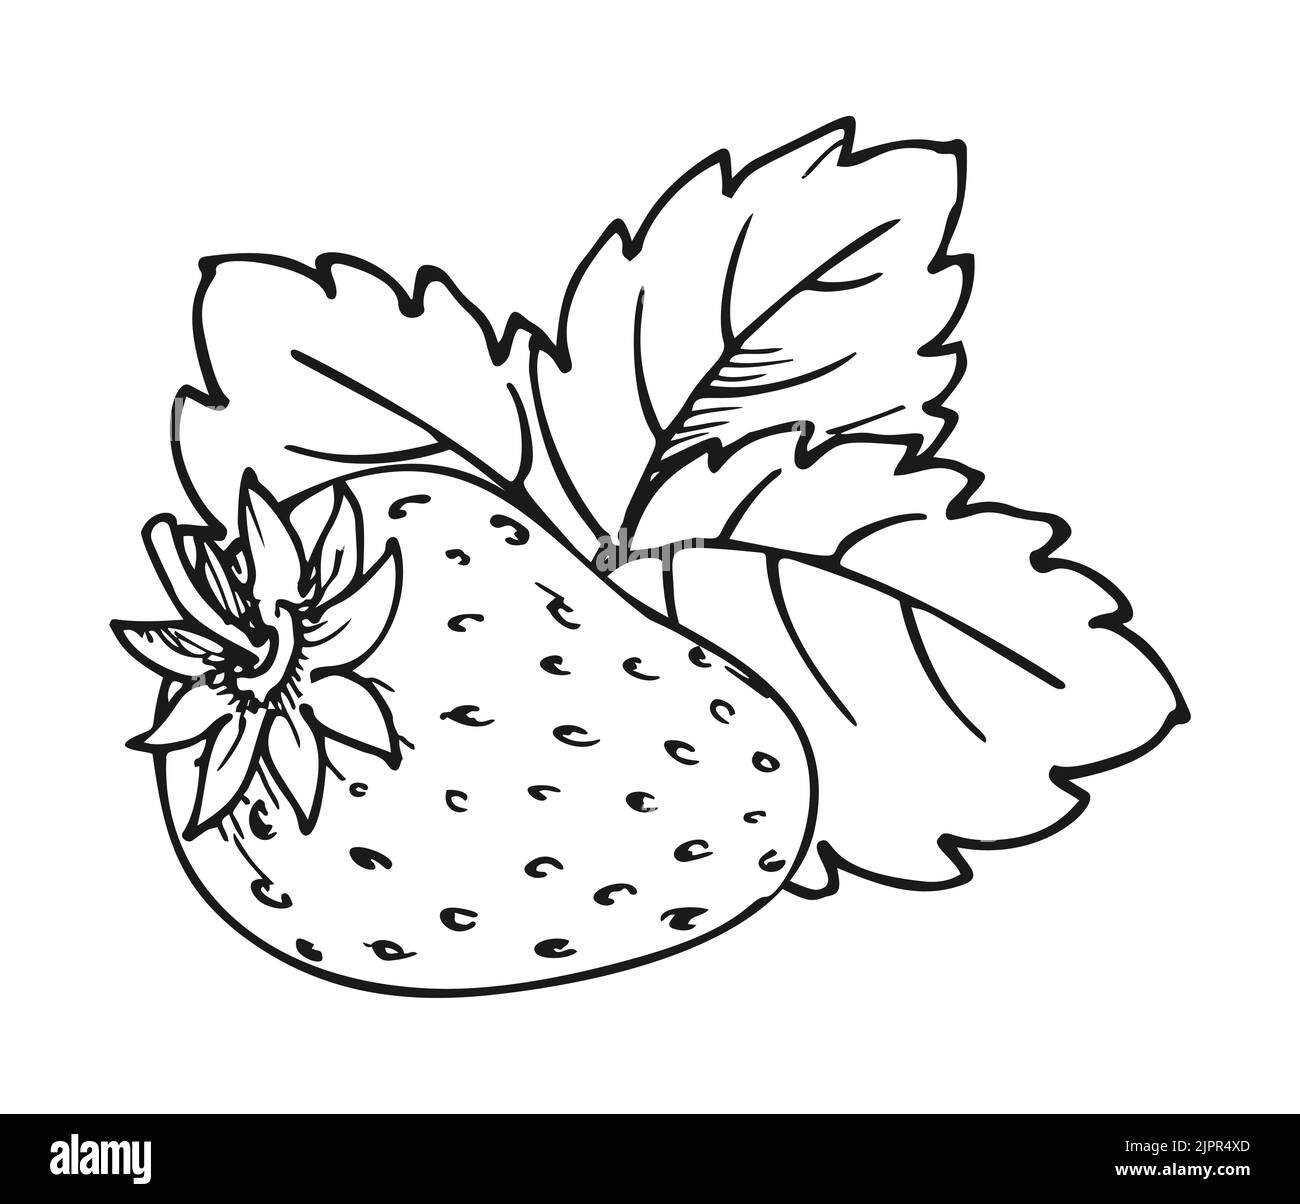 Strawberry educational worksheet coloring book page. Whole ripe wild forest berry with leaf. Tasty sweet fresh farm organic fruit. Juicy strawberries handdrawn outline clip art black white sketch Stock Vector